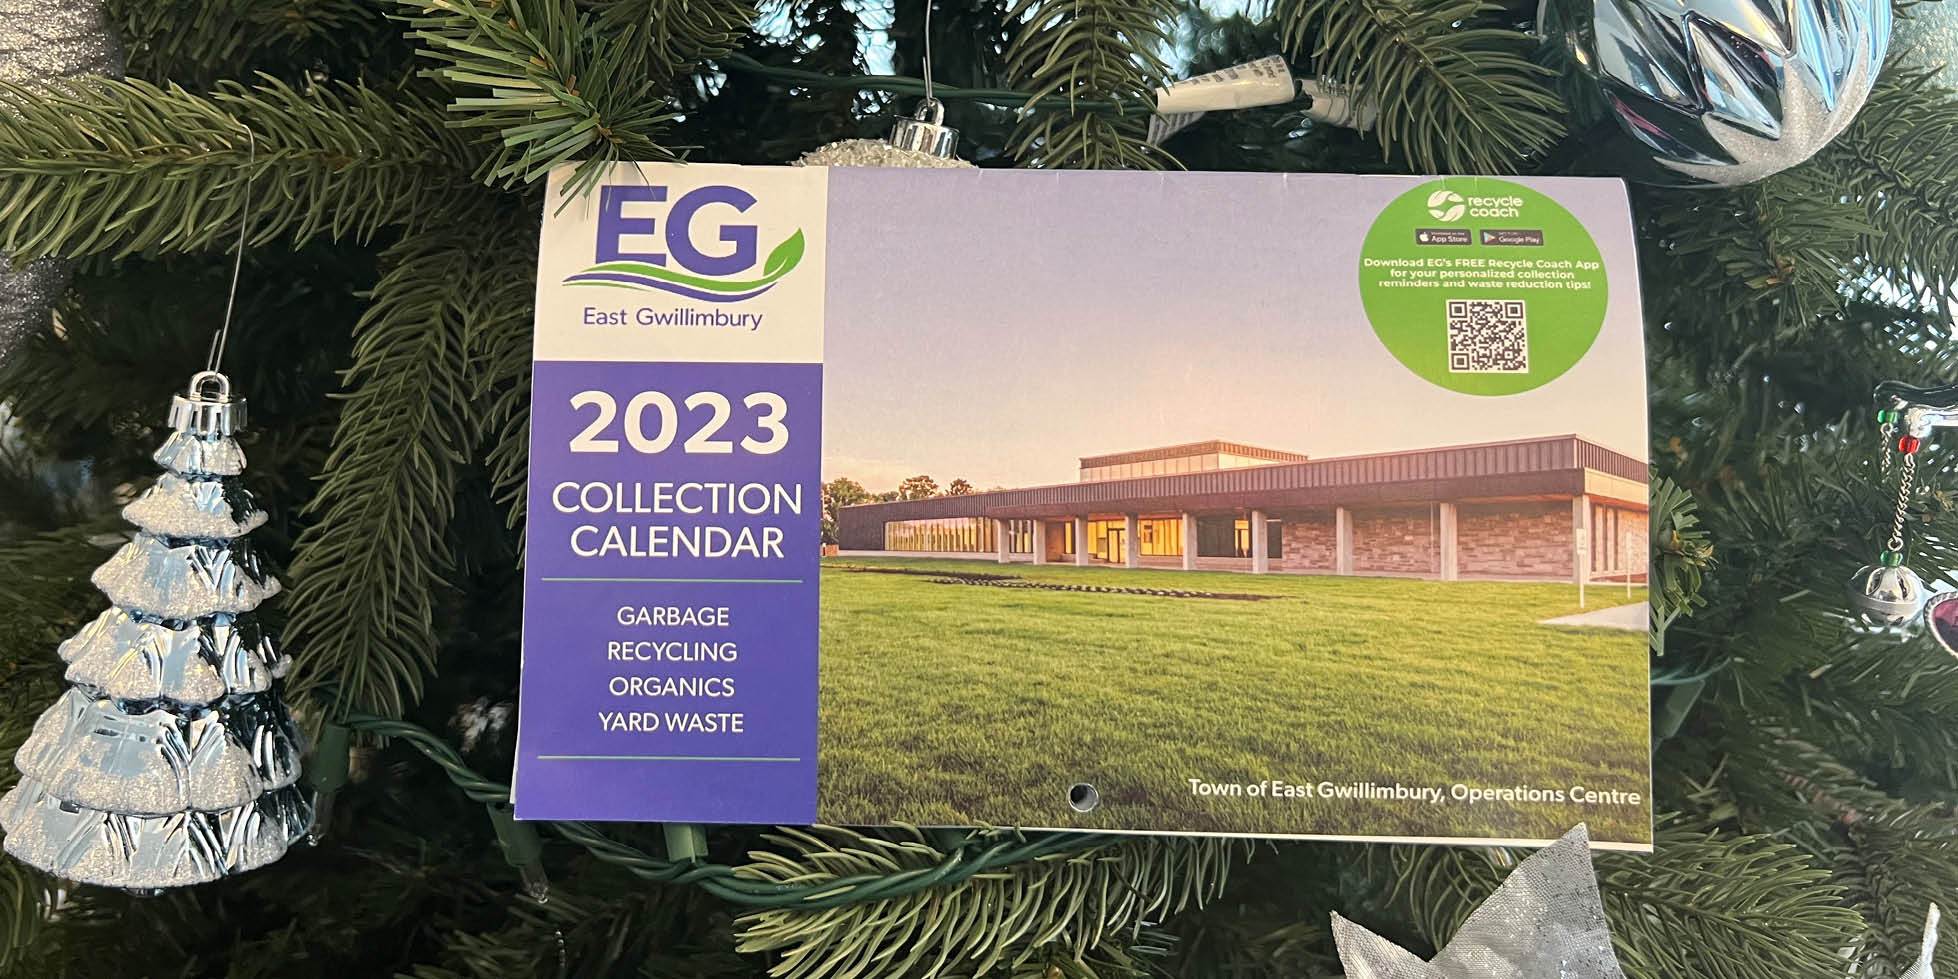 The 2023 Waste Calendar is here! The Town of East Gwillimbury